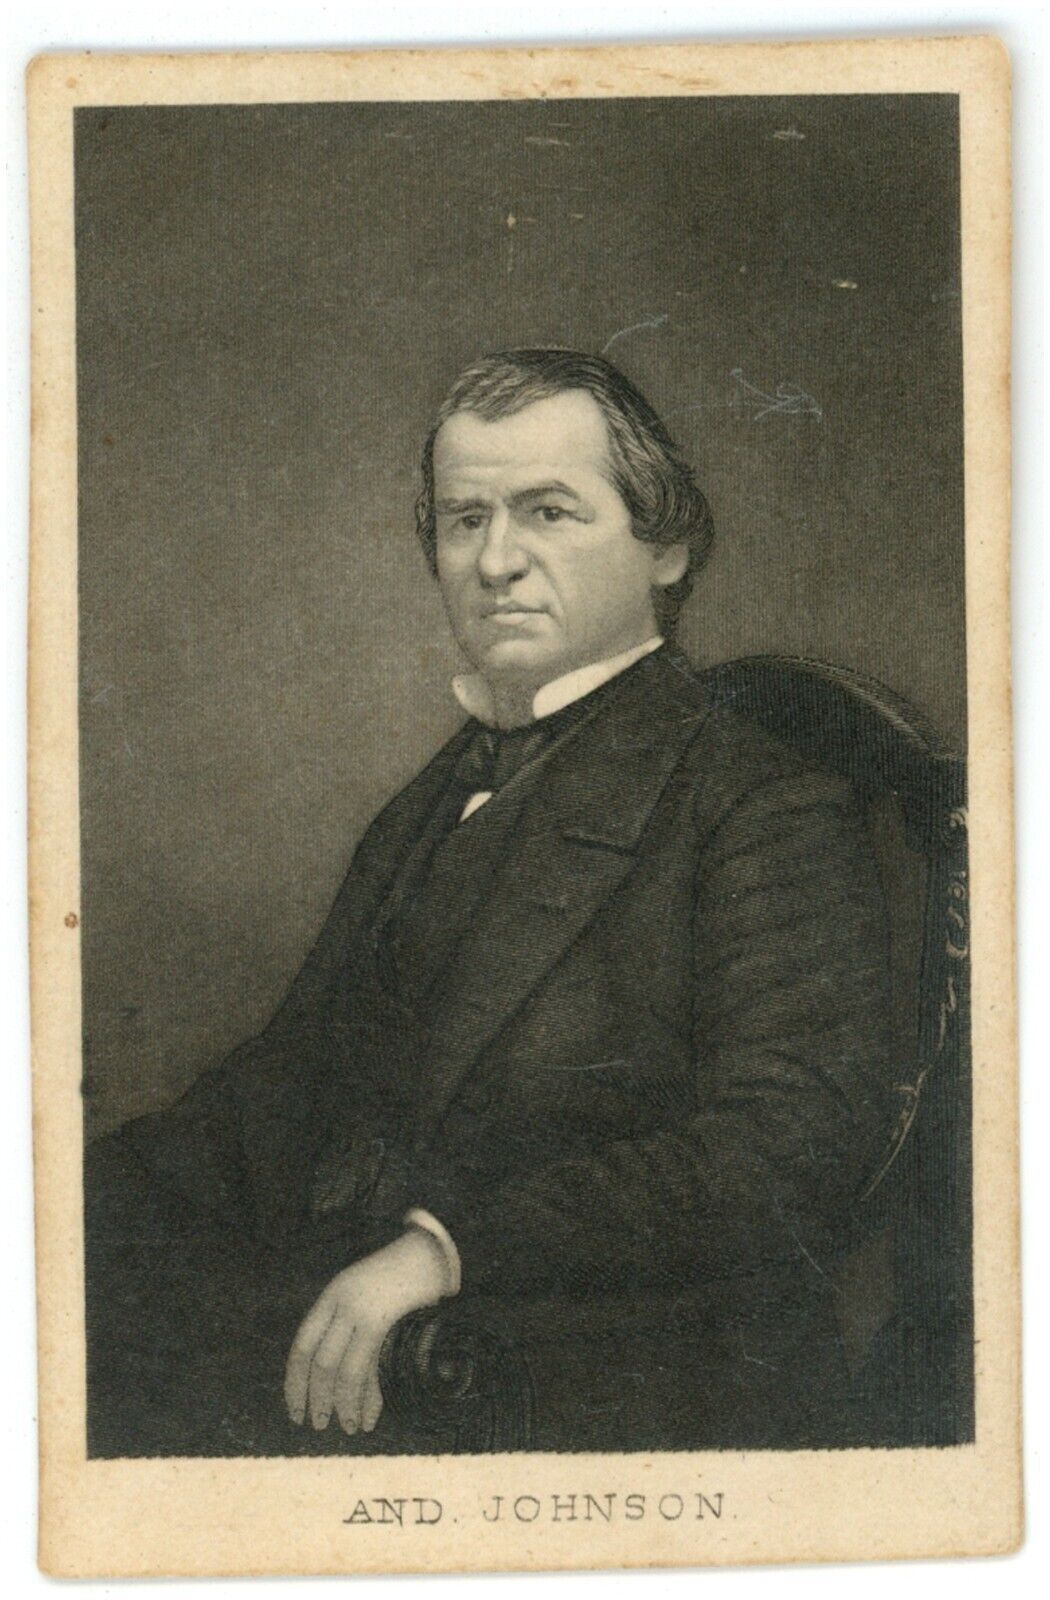 CIRCA 1870'S Scarce CDV Featuring Etching of President Andrew Johnson In Chair